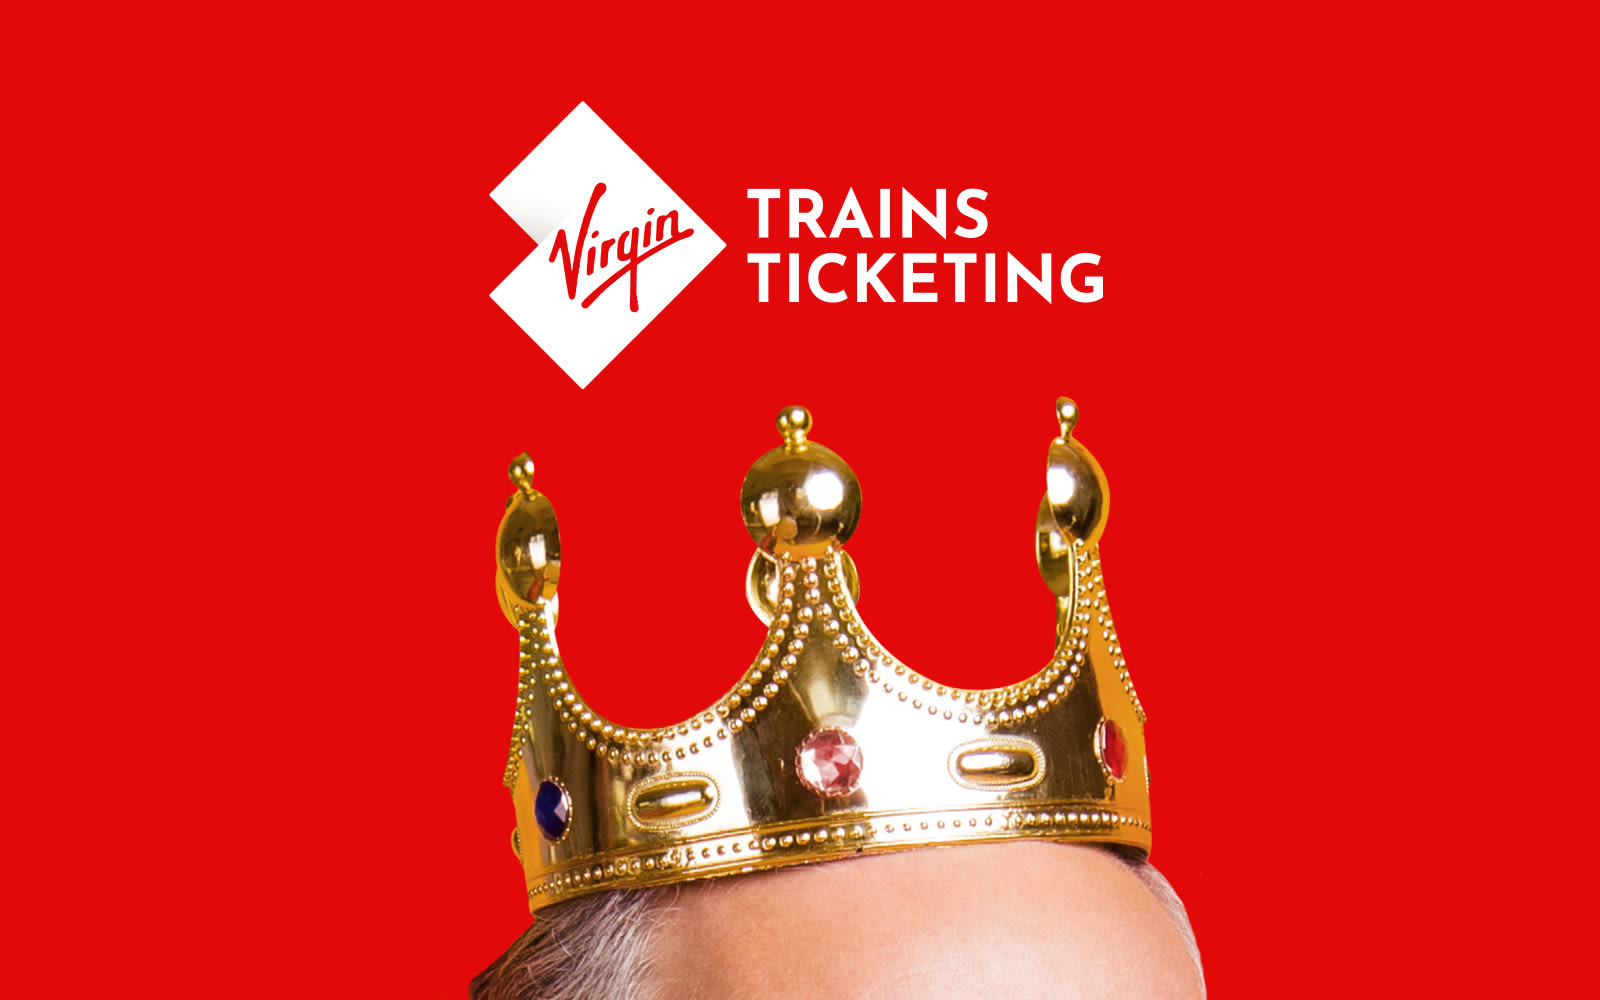 Image of the top of a head with a crown, plus the Virgin Trains Ticketing logo.